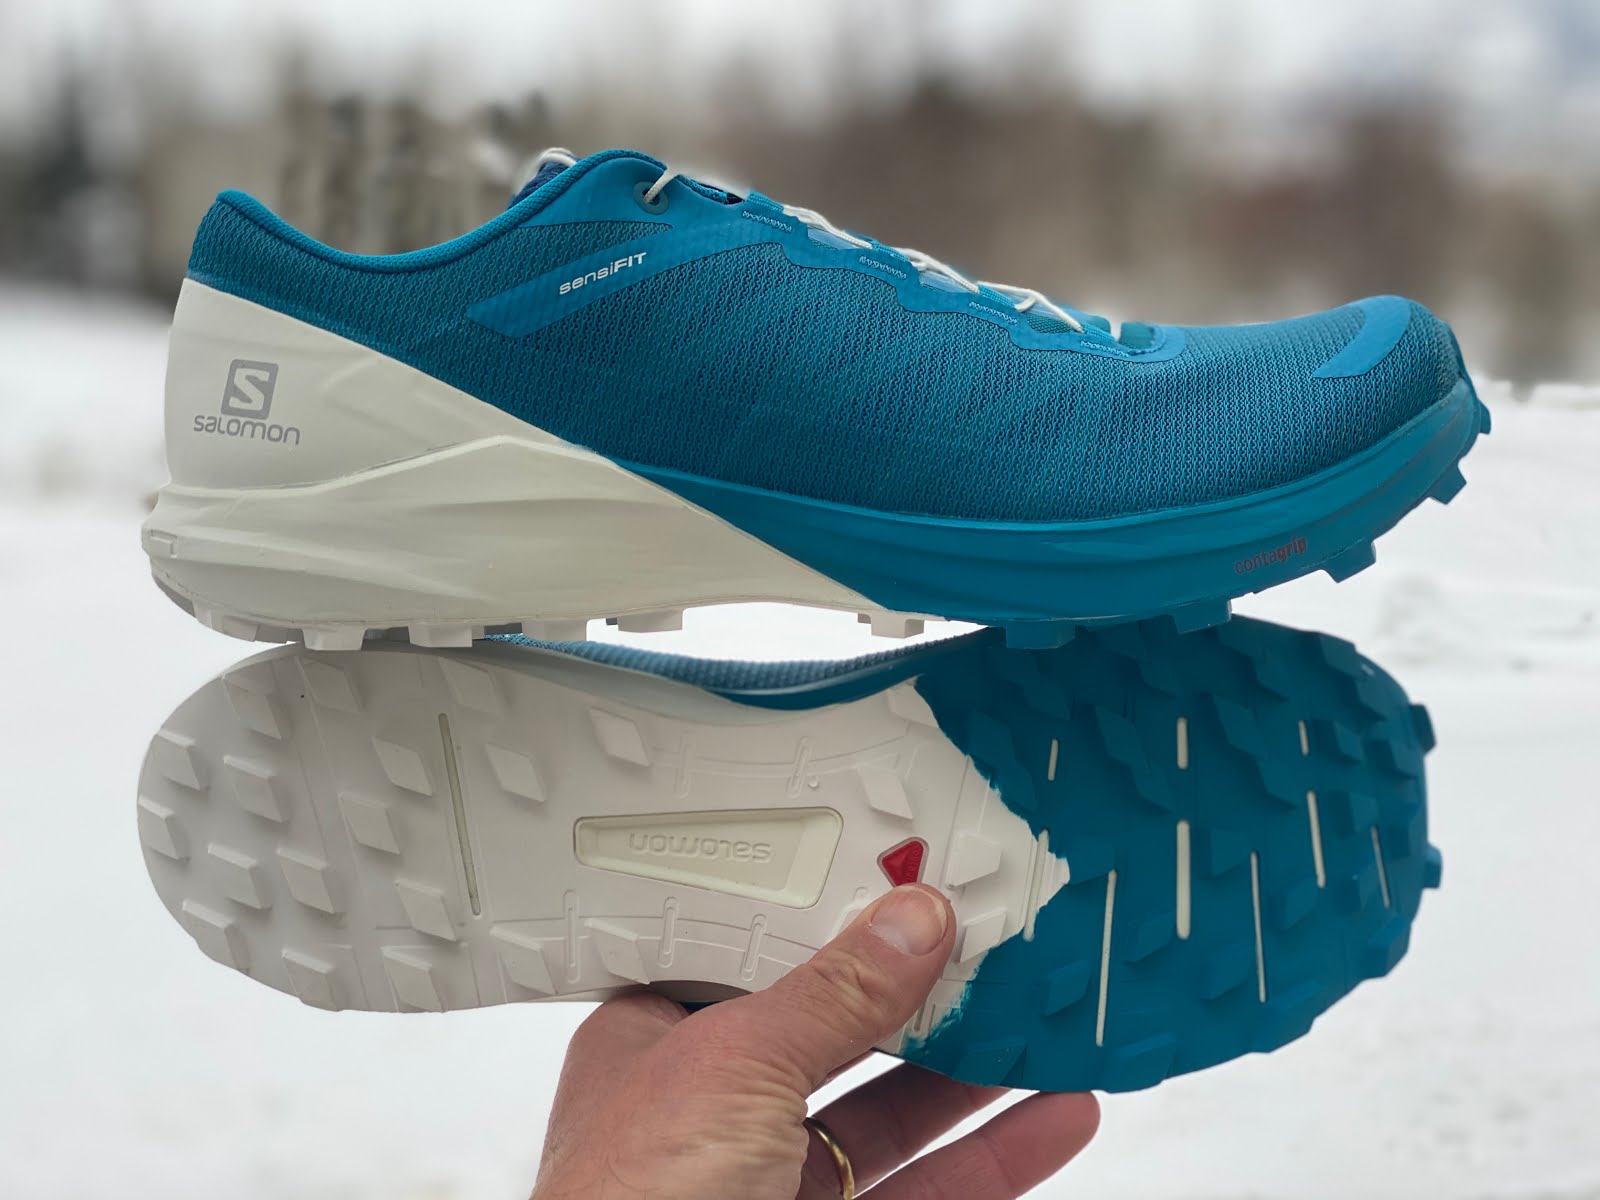 Road Trail Run: Salomon Pro 4 Initial Run Review, Shoe Details, and Video